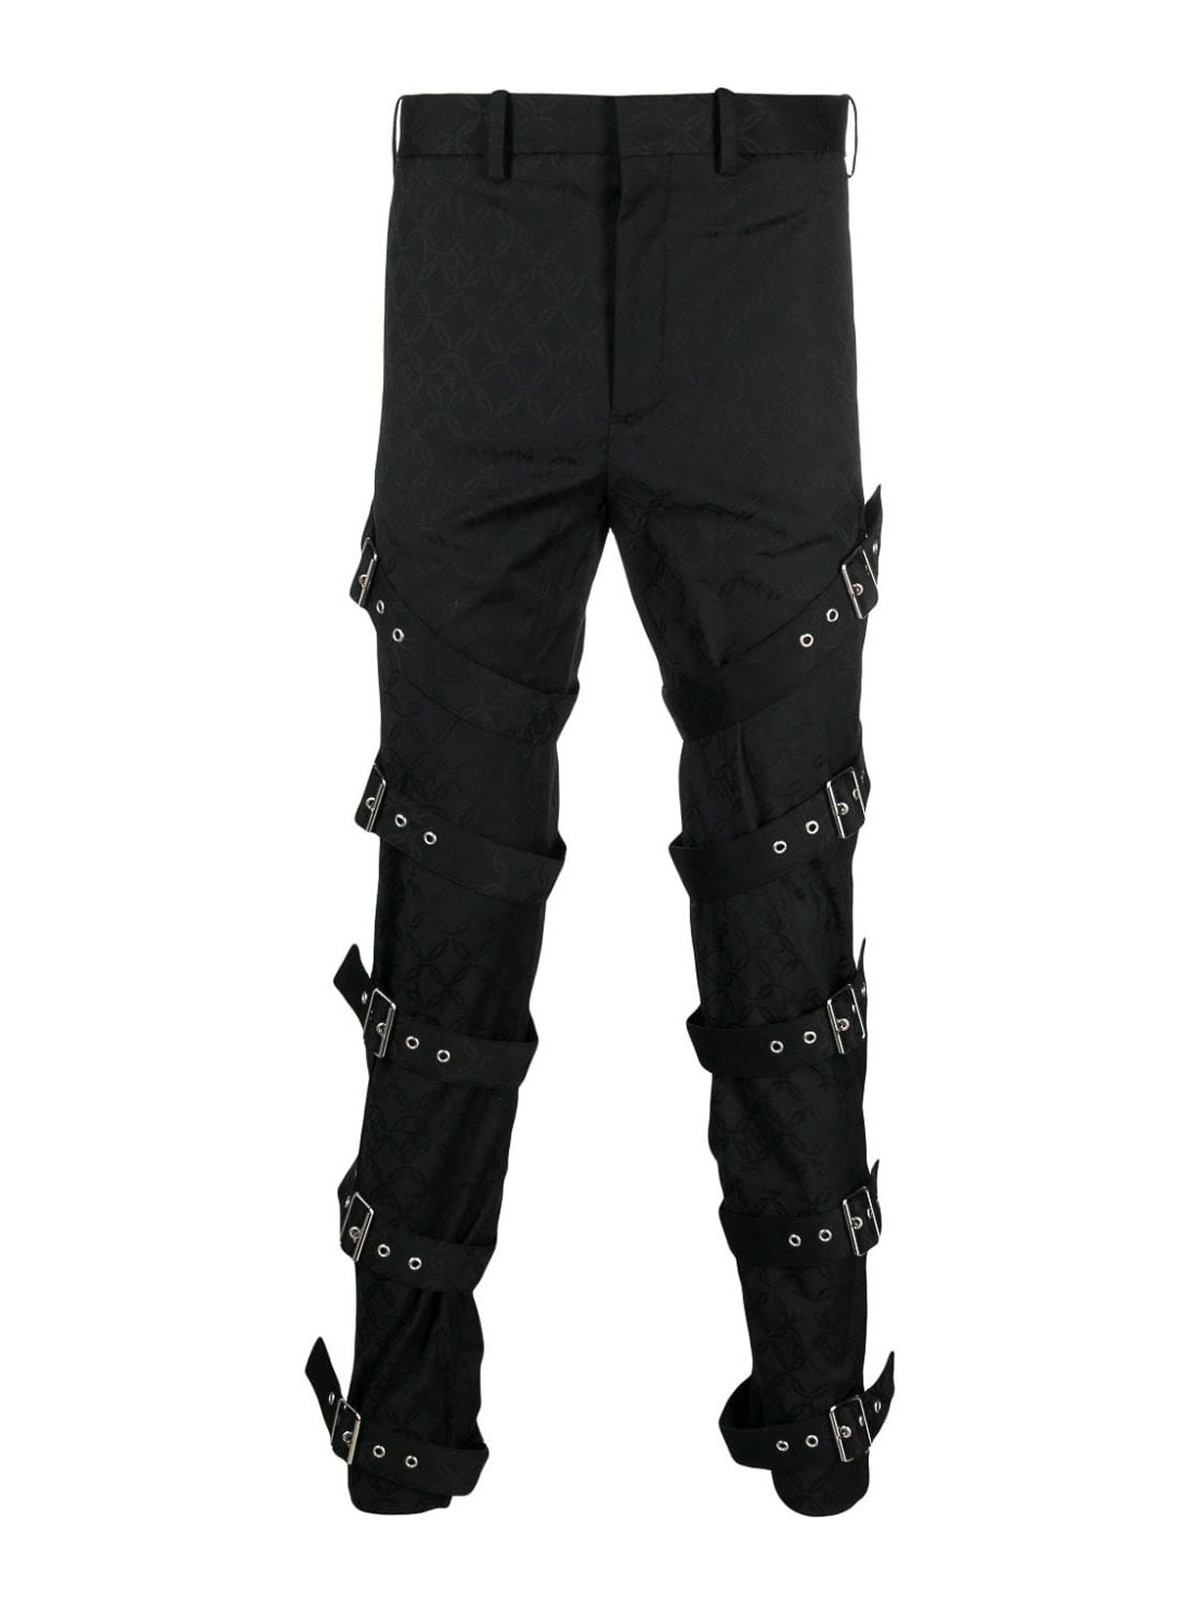 CHARLES JEFFREY LOVERBOY BUCKLE STRAP DETAIL TROUSERS